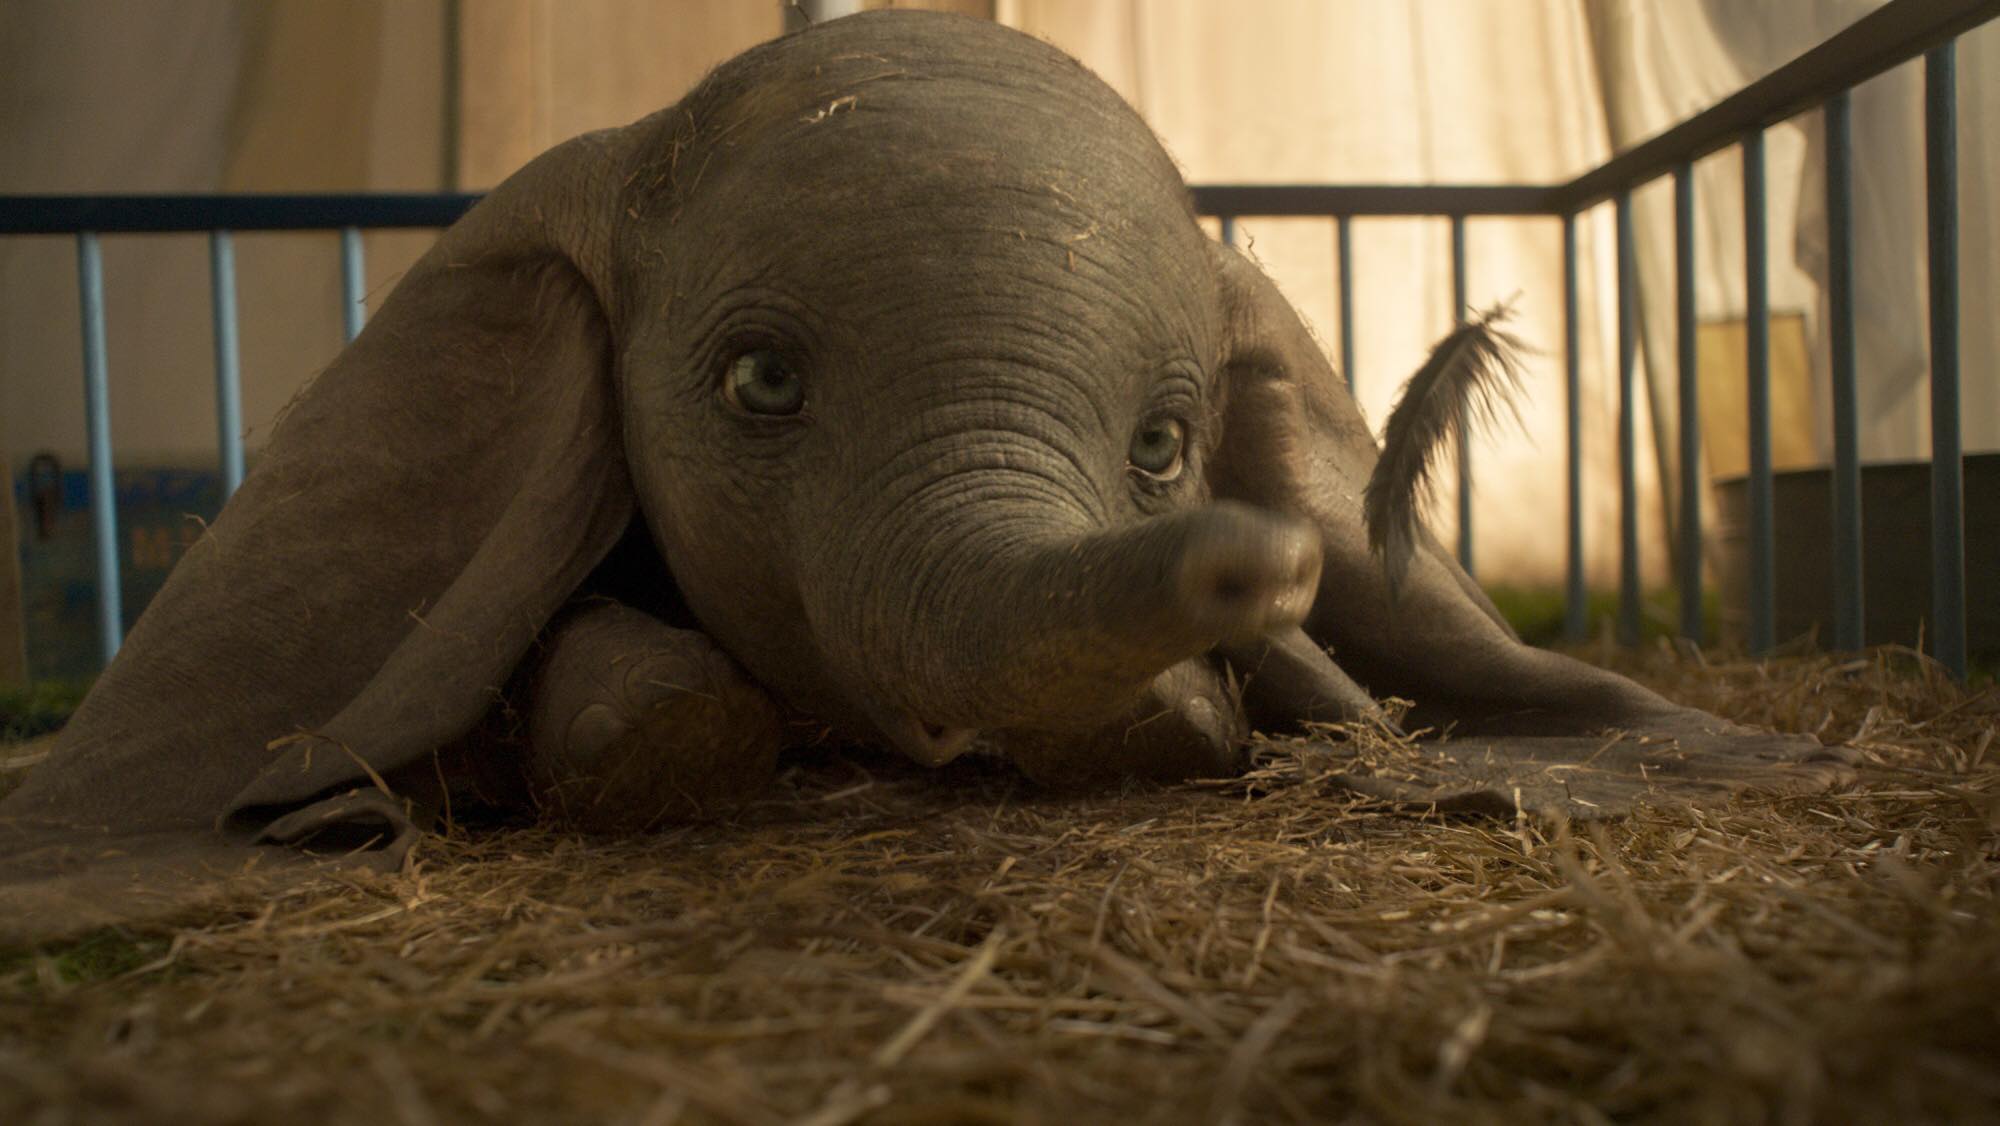 New Dumbo Trailer Shows More of Upcoming Film